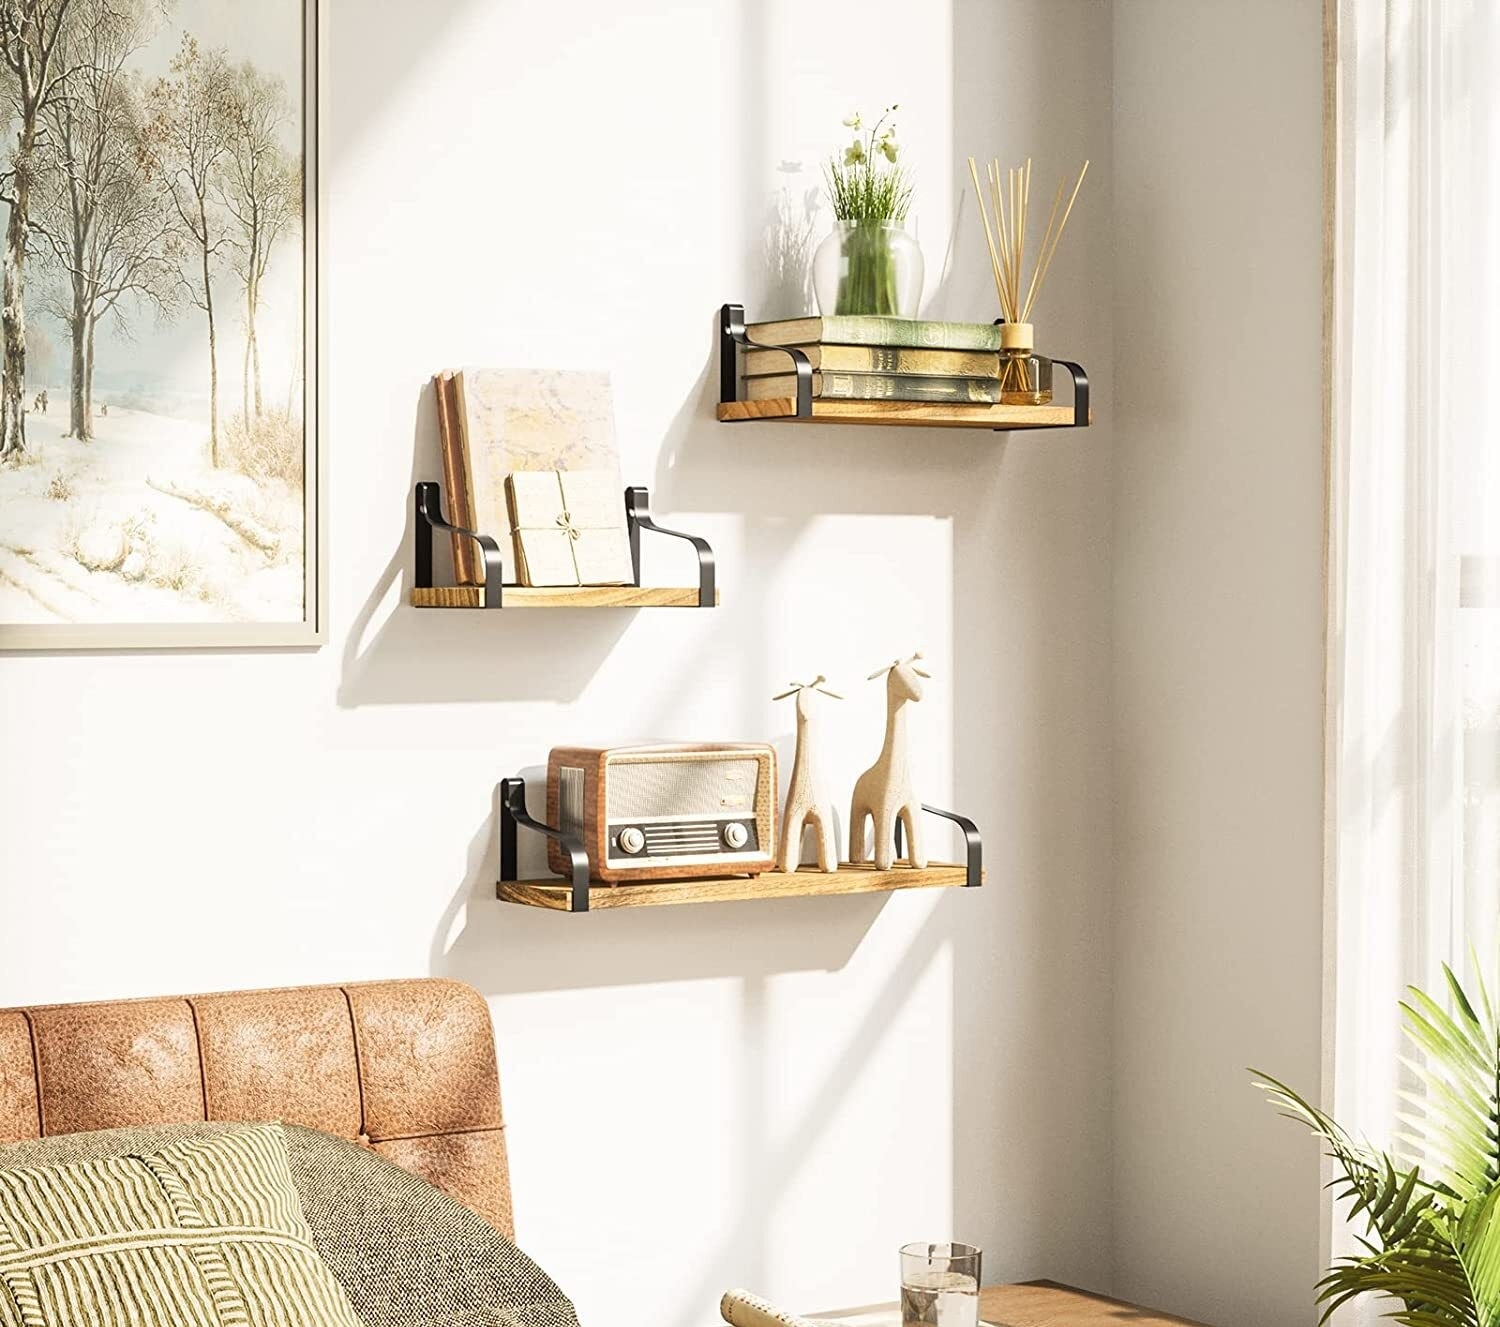 The floating shelves on a bedroom wall